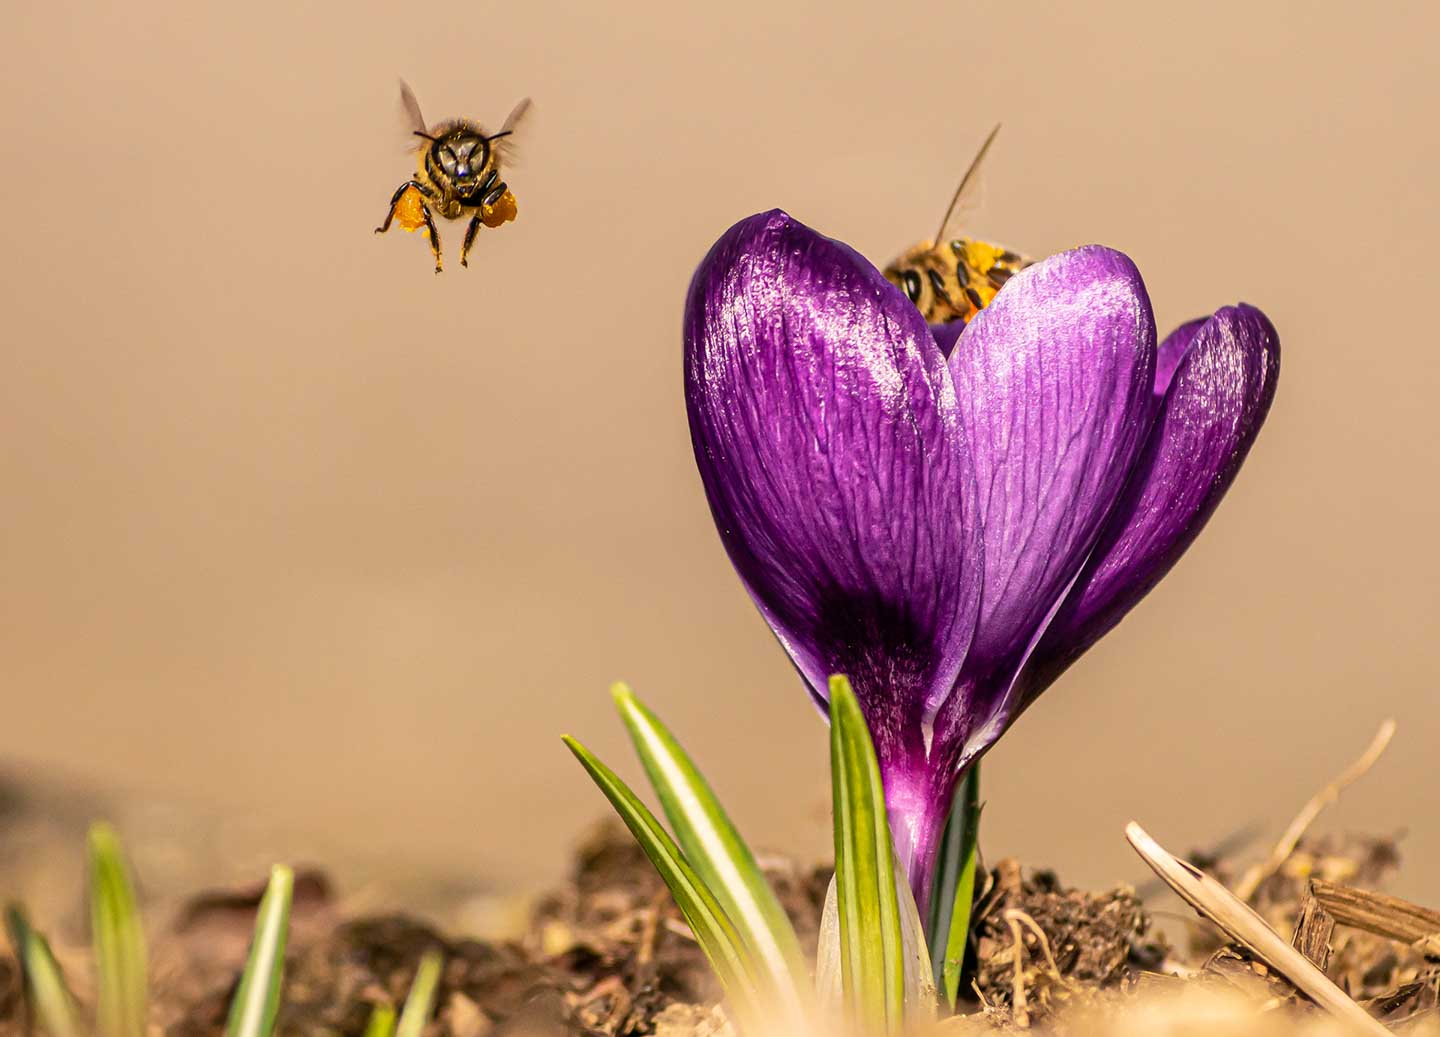 CJPOTY round 3 (March 2023) shortlisted image - crocus with bees